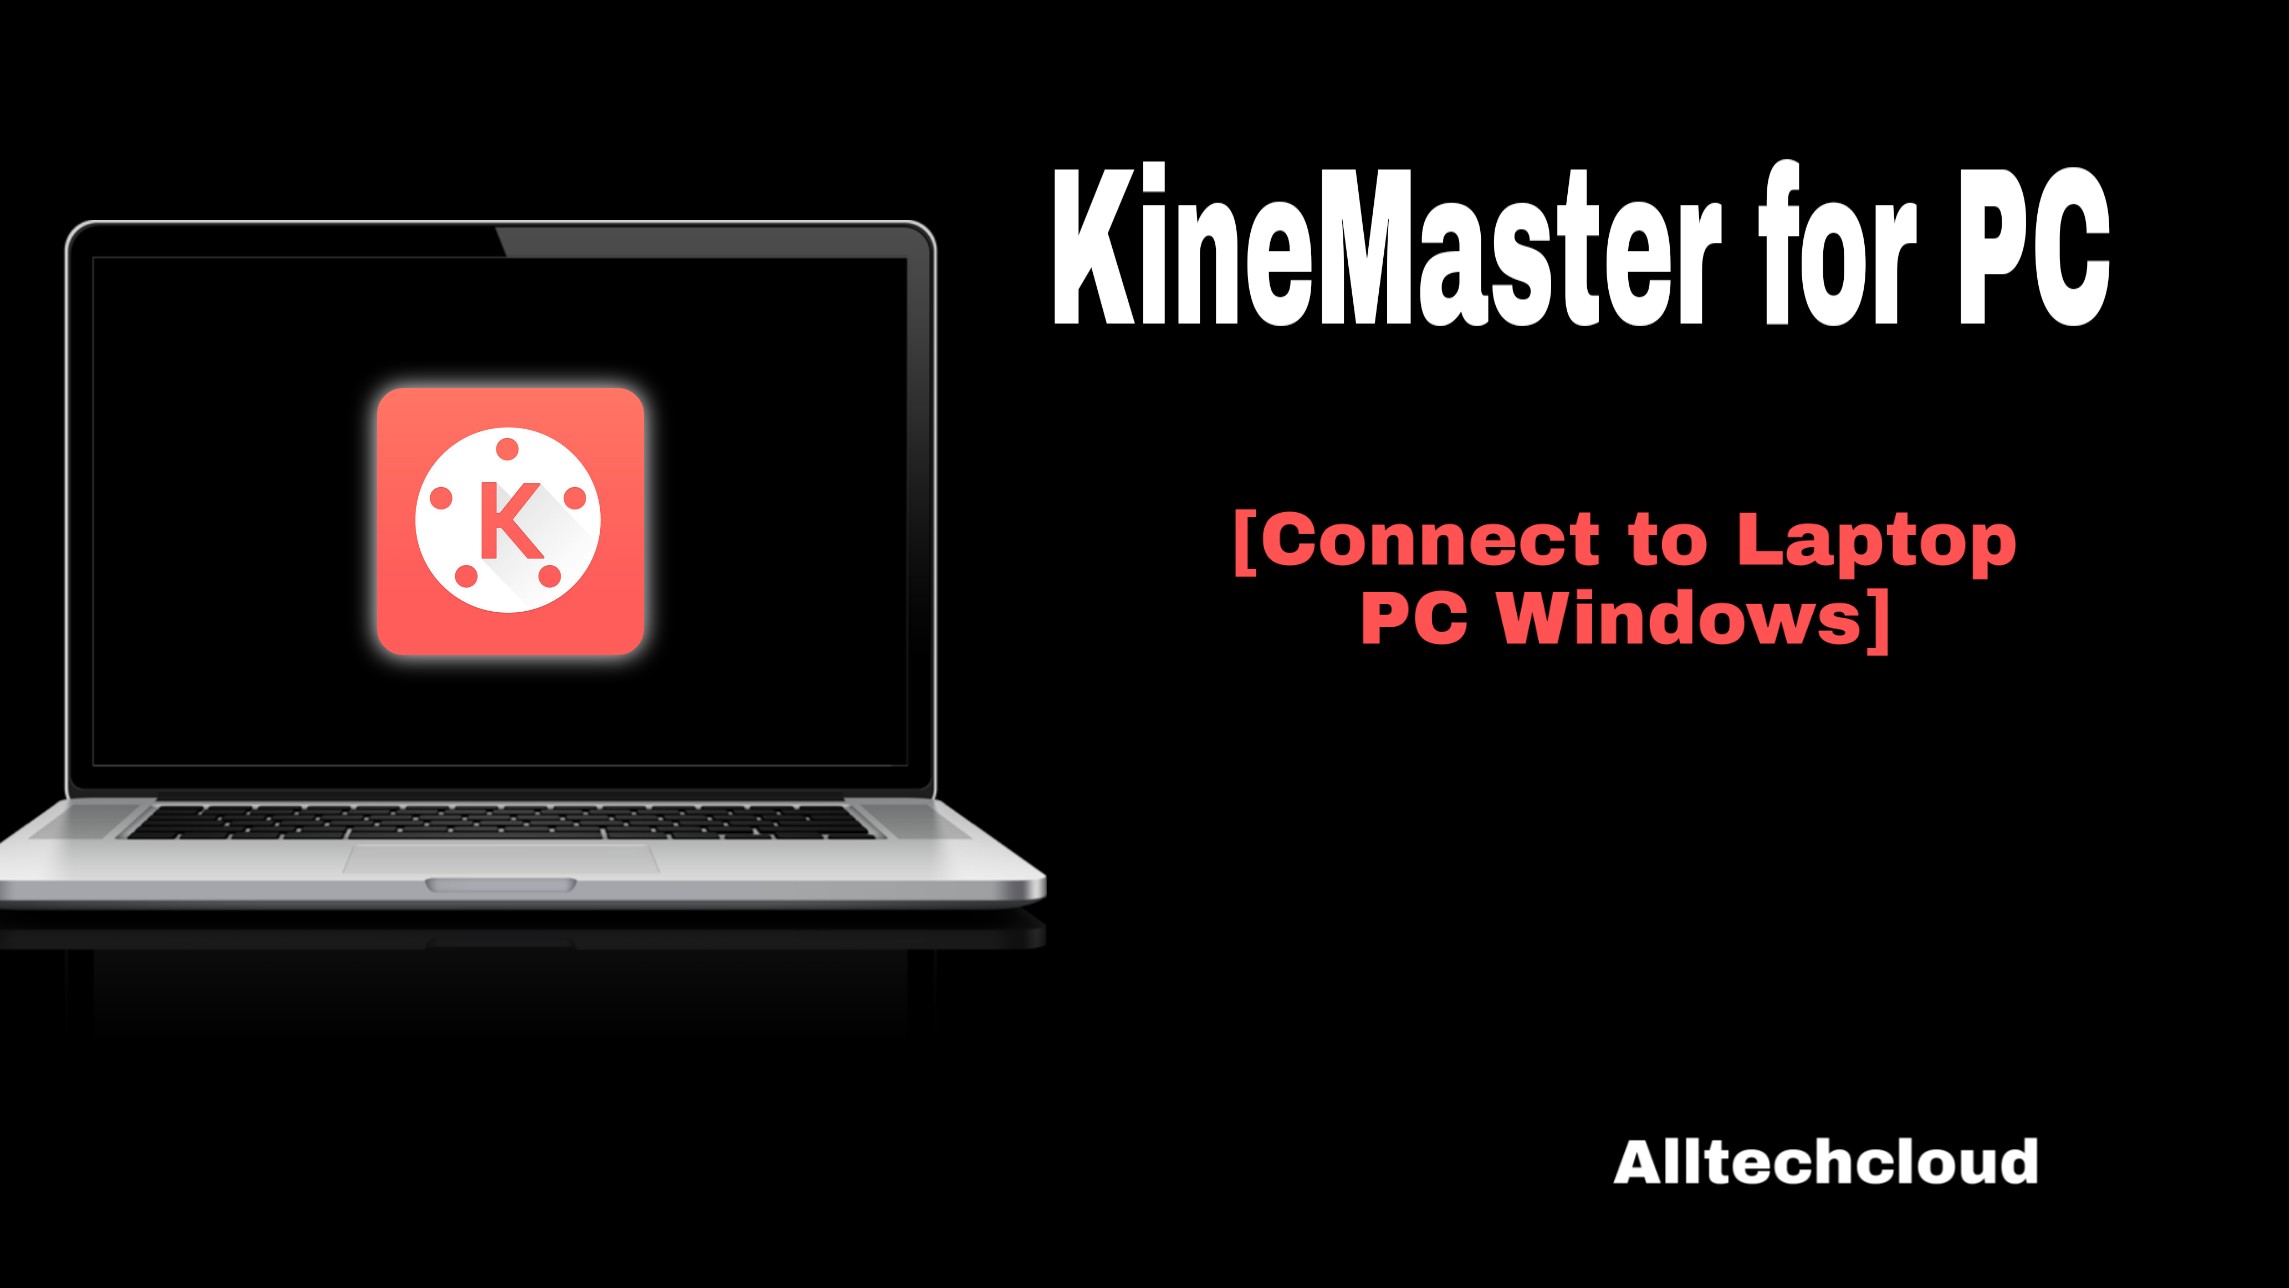 KineMaster For PC Window 7/8/10) Download Sep 2020 (Official)